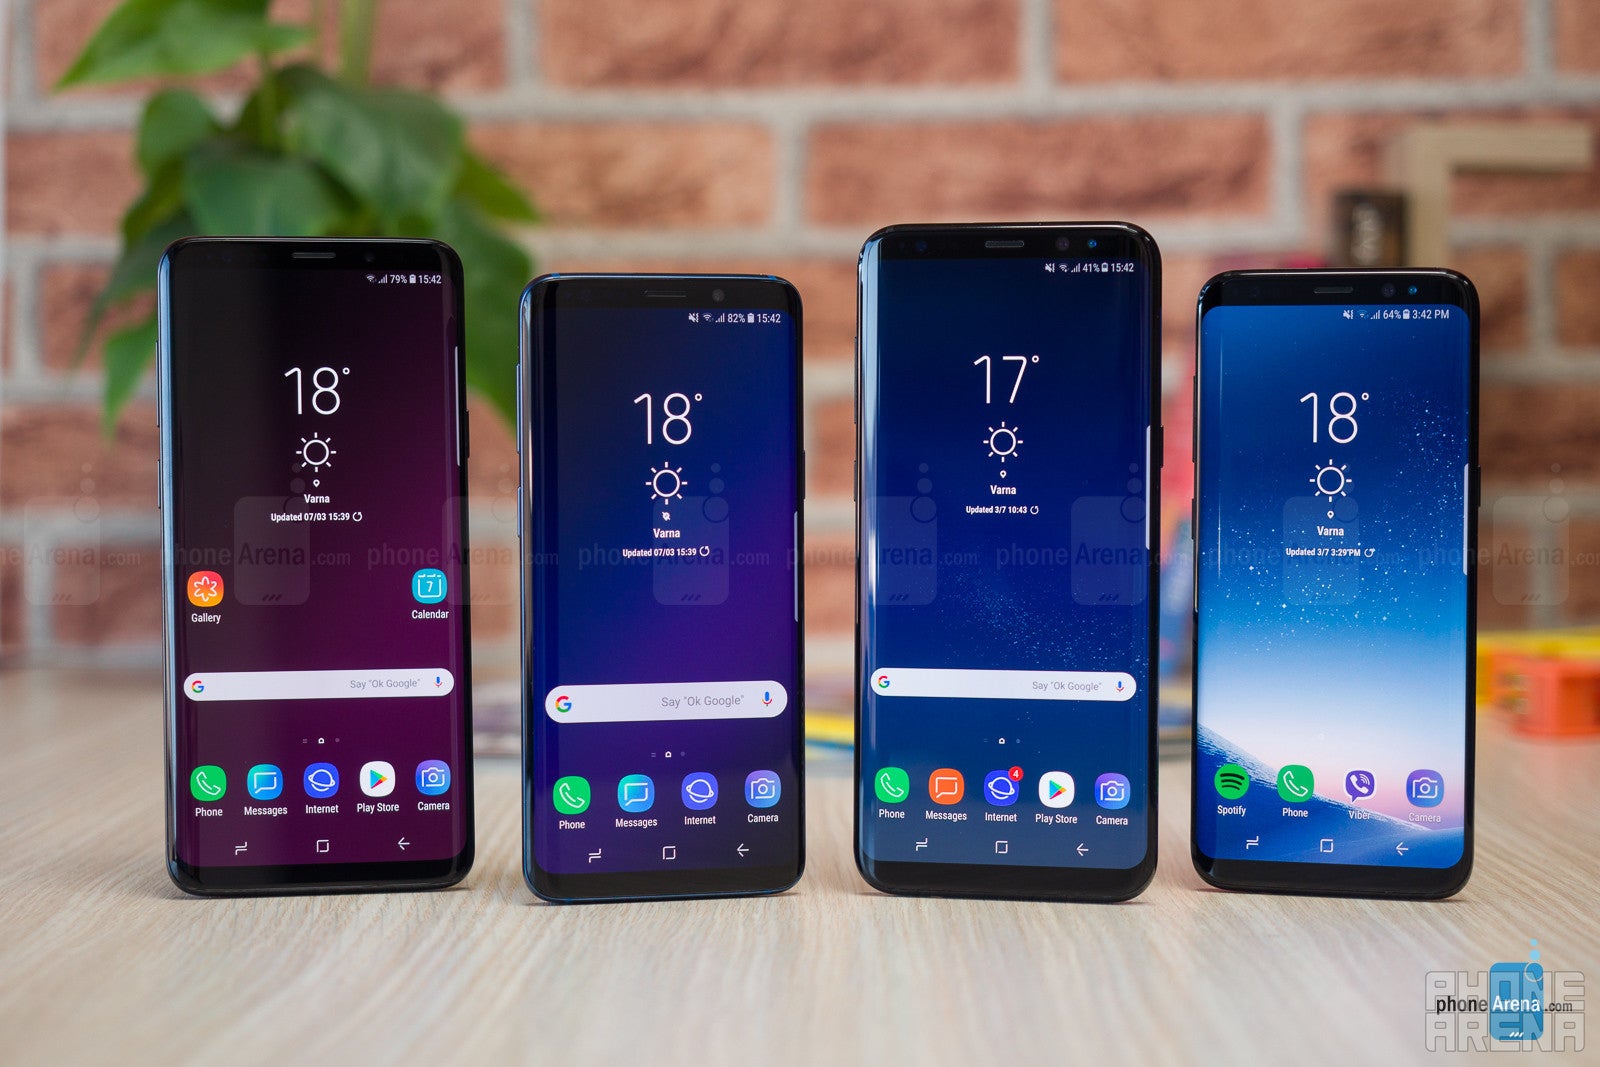 Samsung Galaxy S9 and S9+ vs Galaxy S8 and S8+